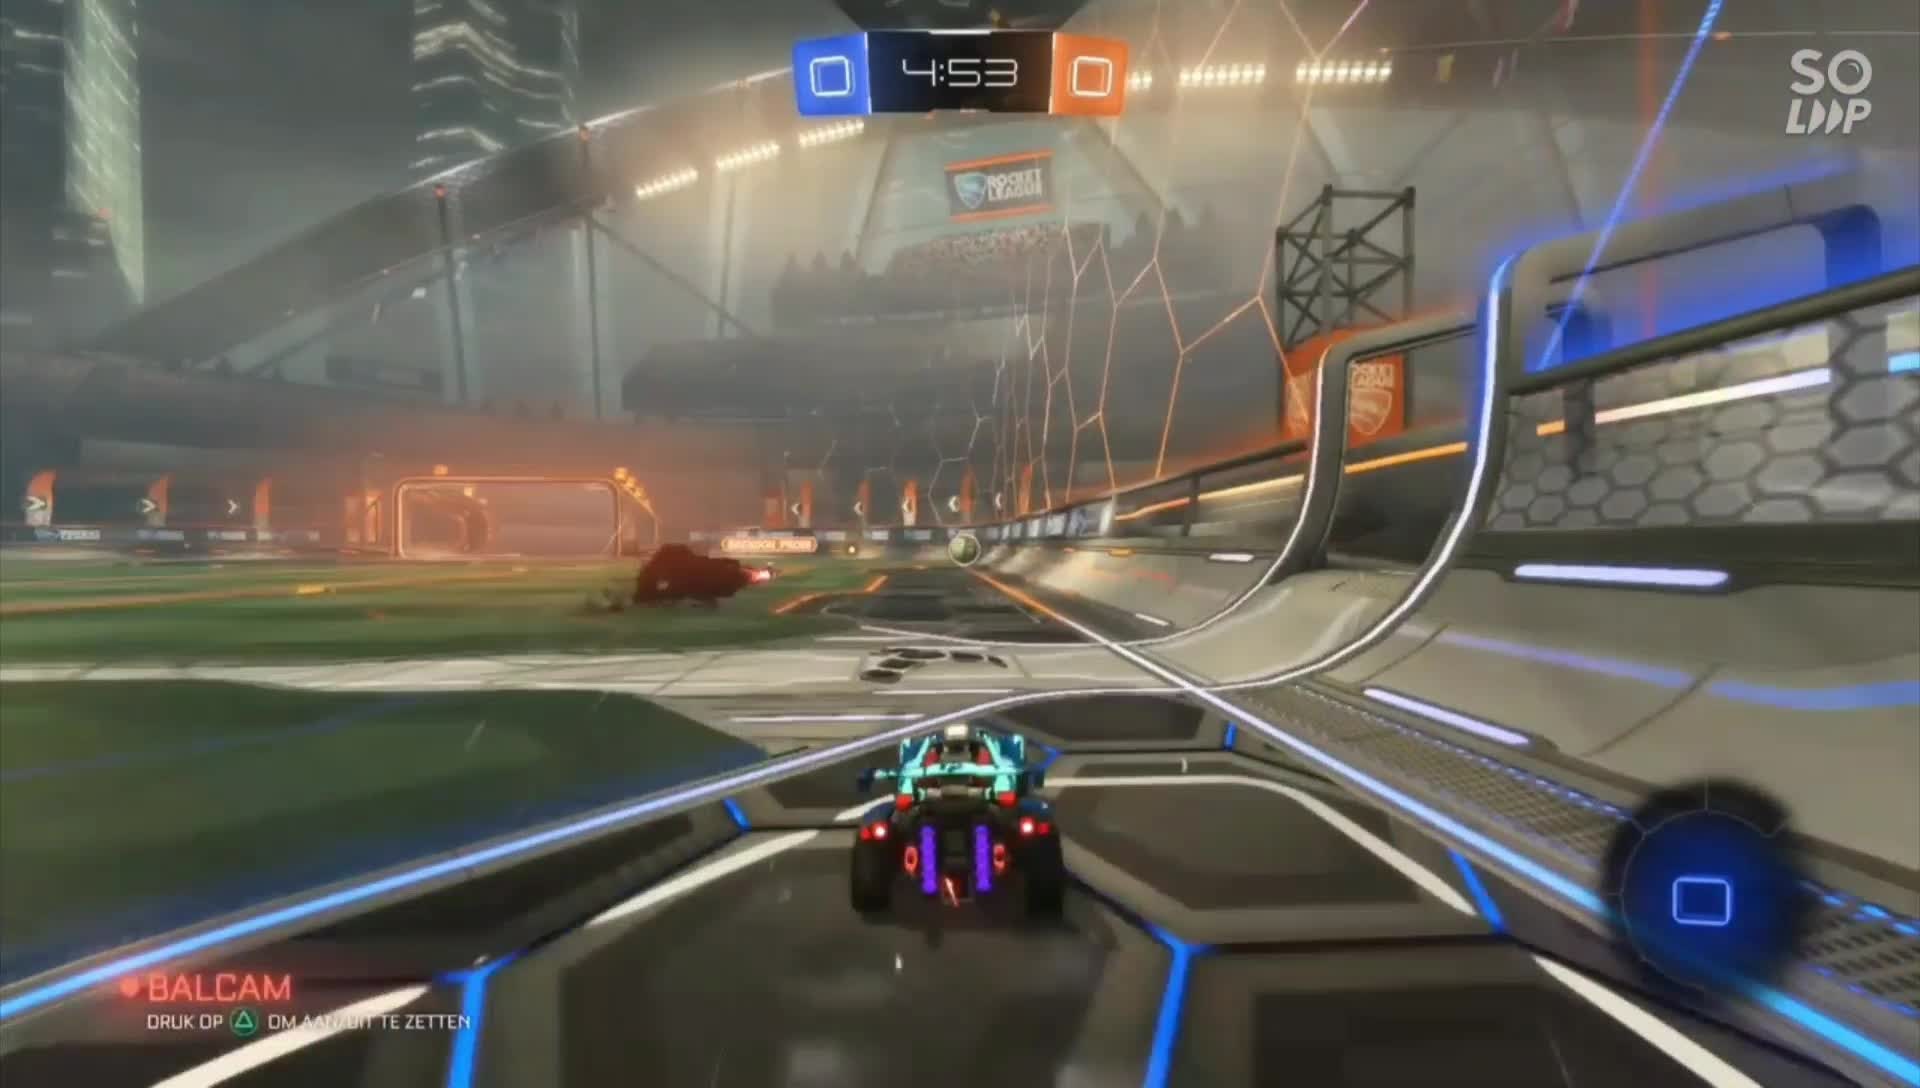 Rocket League: General - Goals from my 1v1 today 🥵 video cover image 1